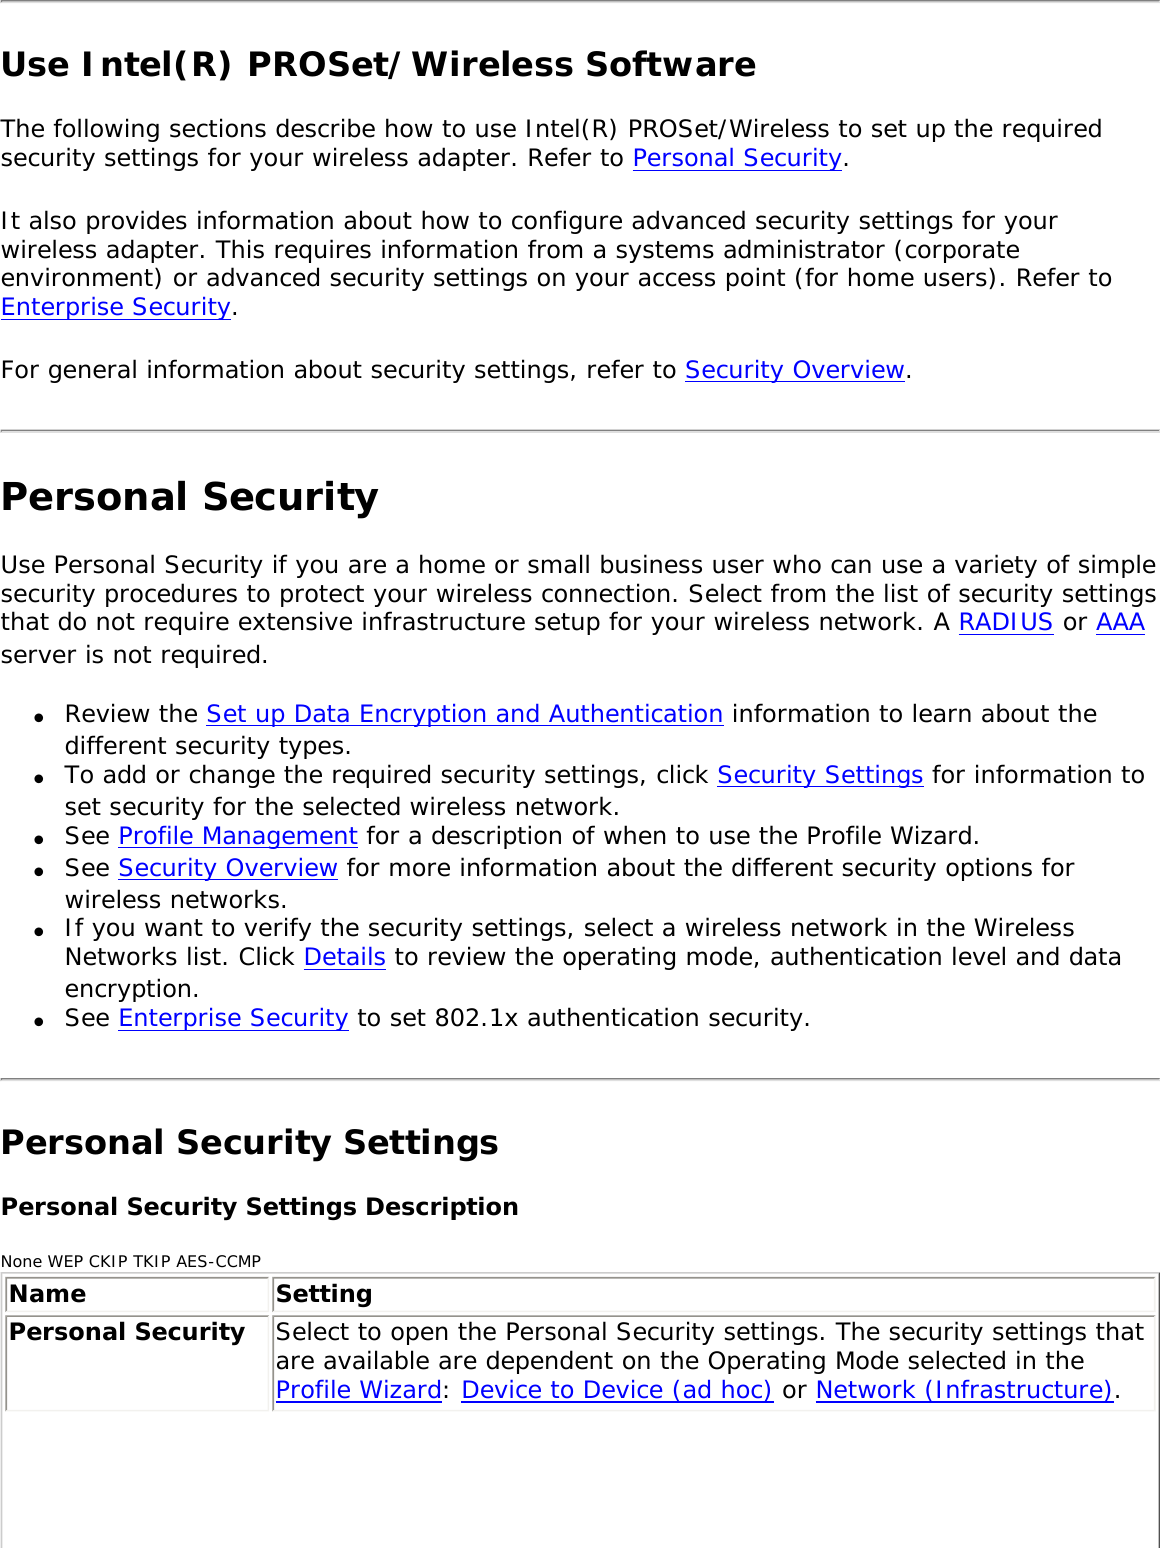 Use Intel(R) PROSet/Wireless Software The following sections describe how to use Intel(R) PROSet/Wireless to set up the required security settings for your wireless adapter. Refer to Personal Security. It also provides information about how to configure advanced security settings for your wireless adapter. This requires information from a systems administrator (corporate environment) or advanced security settings on your access point (for home users). Refer to Enterprise Security. For general information about security settings, refer to Security Overview.Personal SecurityUse Personal Security if you are a home or small business user who can use a variety of simple security procedures to protect your wireless connection. Select from the list of security settings that do not require extensive infrastructure setup for your wireless network. A RADIUS or AAA server is not required. ●     Review the Set up Data Encryption and Authentication information to learn about the different security types.●     To add or change the required security settings, click Security Settings for information to set security for the selected wireless network. ●     See Profile Management for a description of when to use the Profile Wizard. ●     See Security Overview for more information about the different security options for wireless networks. ●     If you want to verify the security settings, select a wireless network in the Wireless Networks list. Click Details to review the operating mode, authentication level and data encryption. ●     See Enterprise Security to set 802.1x authentication security. Personal Security Settings Personal Security Settings DescriptionNone WEP CKIP TKIP AES-CCMPName SettingPersonal Security  Select to open the Personal Security settings. The security settings that are available are dependent on the Operating Mode selected in the Profile Wizard: Device to Device (ad hoc) or Network (Infrastructure). 